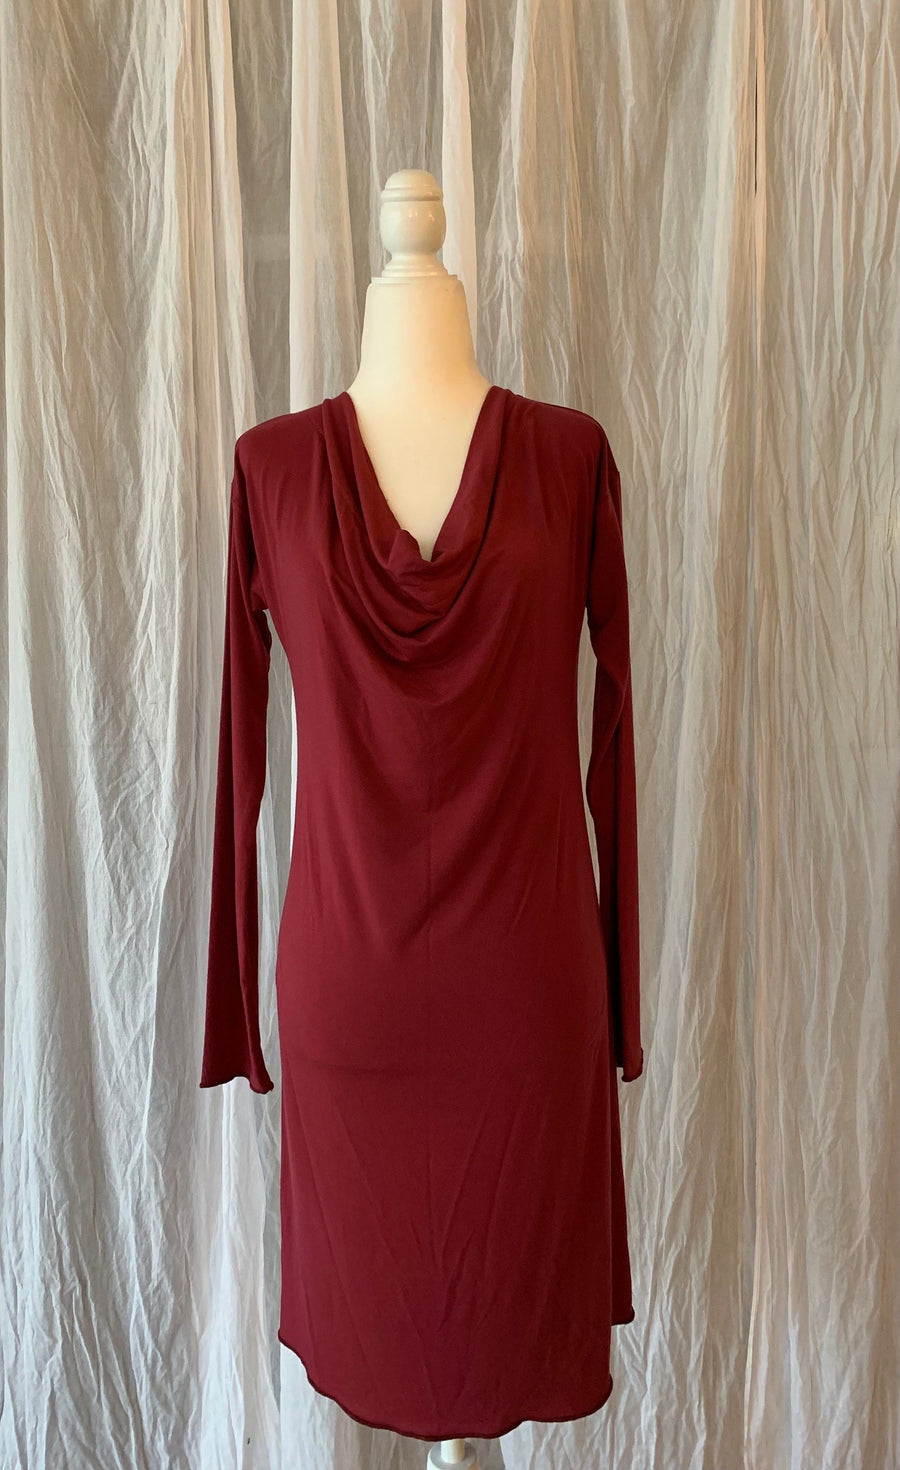 Womens Draped Neck Bamboo Dress, Womens Nightgown, Midi Dress, Loungewear, Ready to Ship in Size Small, Color Sherry Red